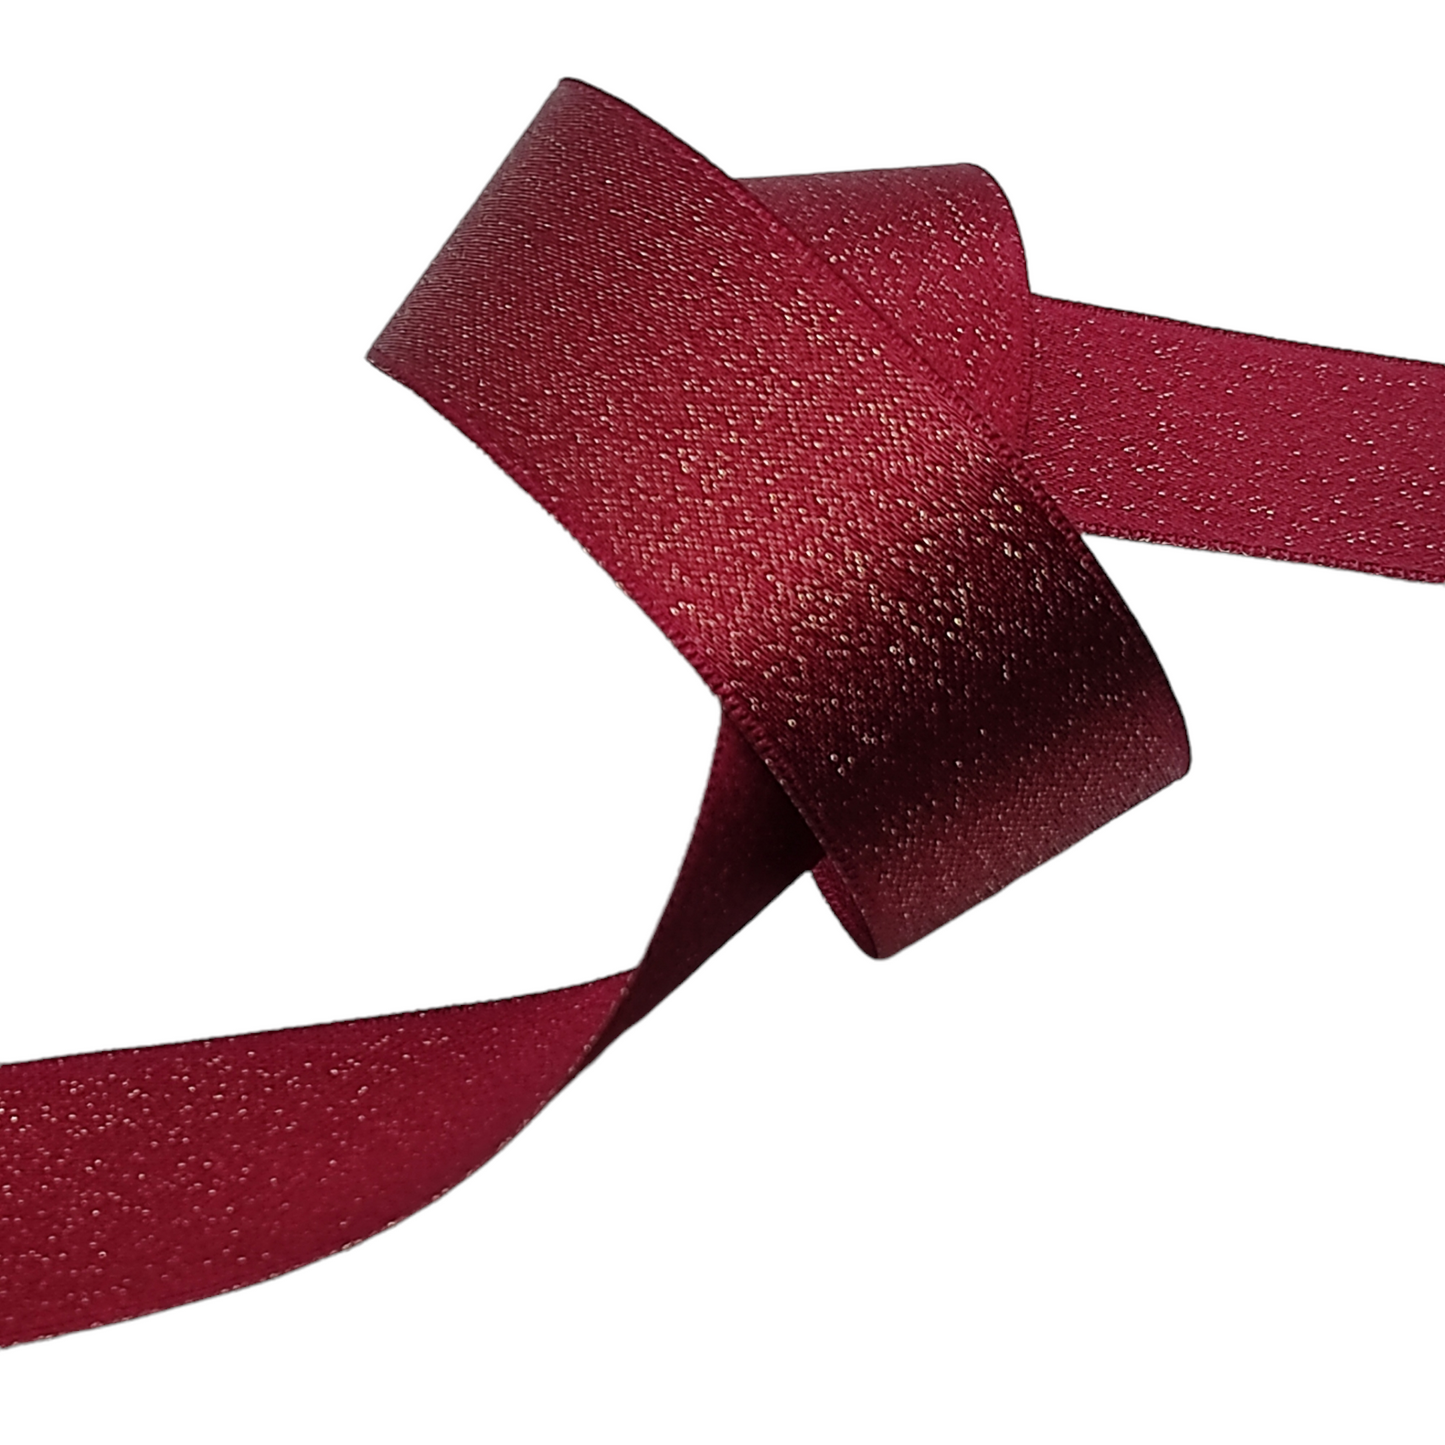 Strings in various colors glittery satin ribbon